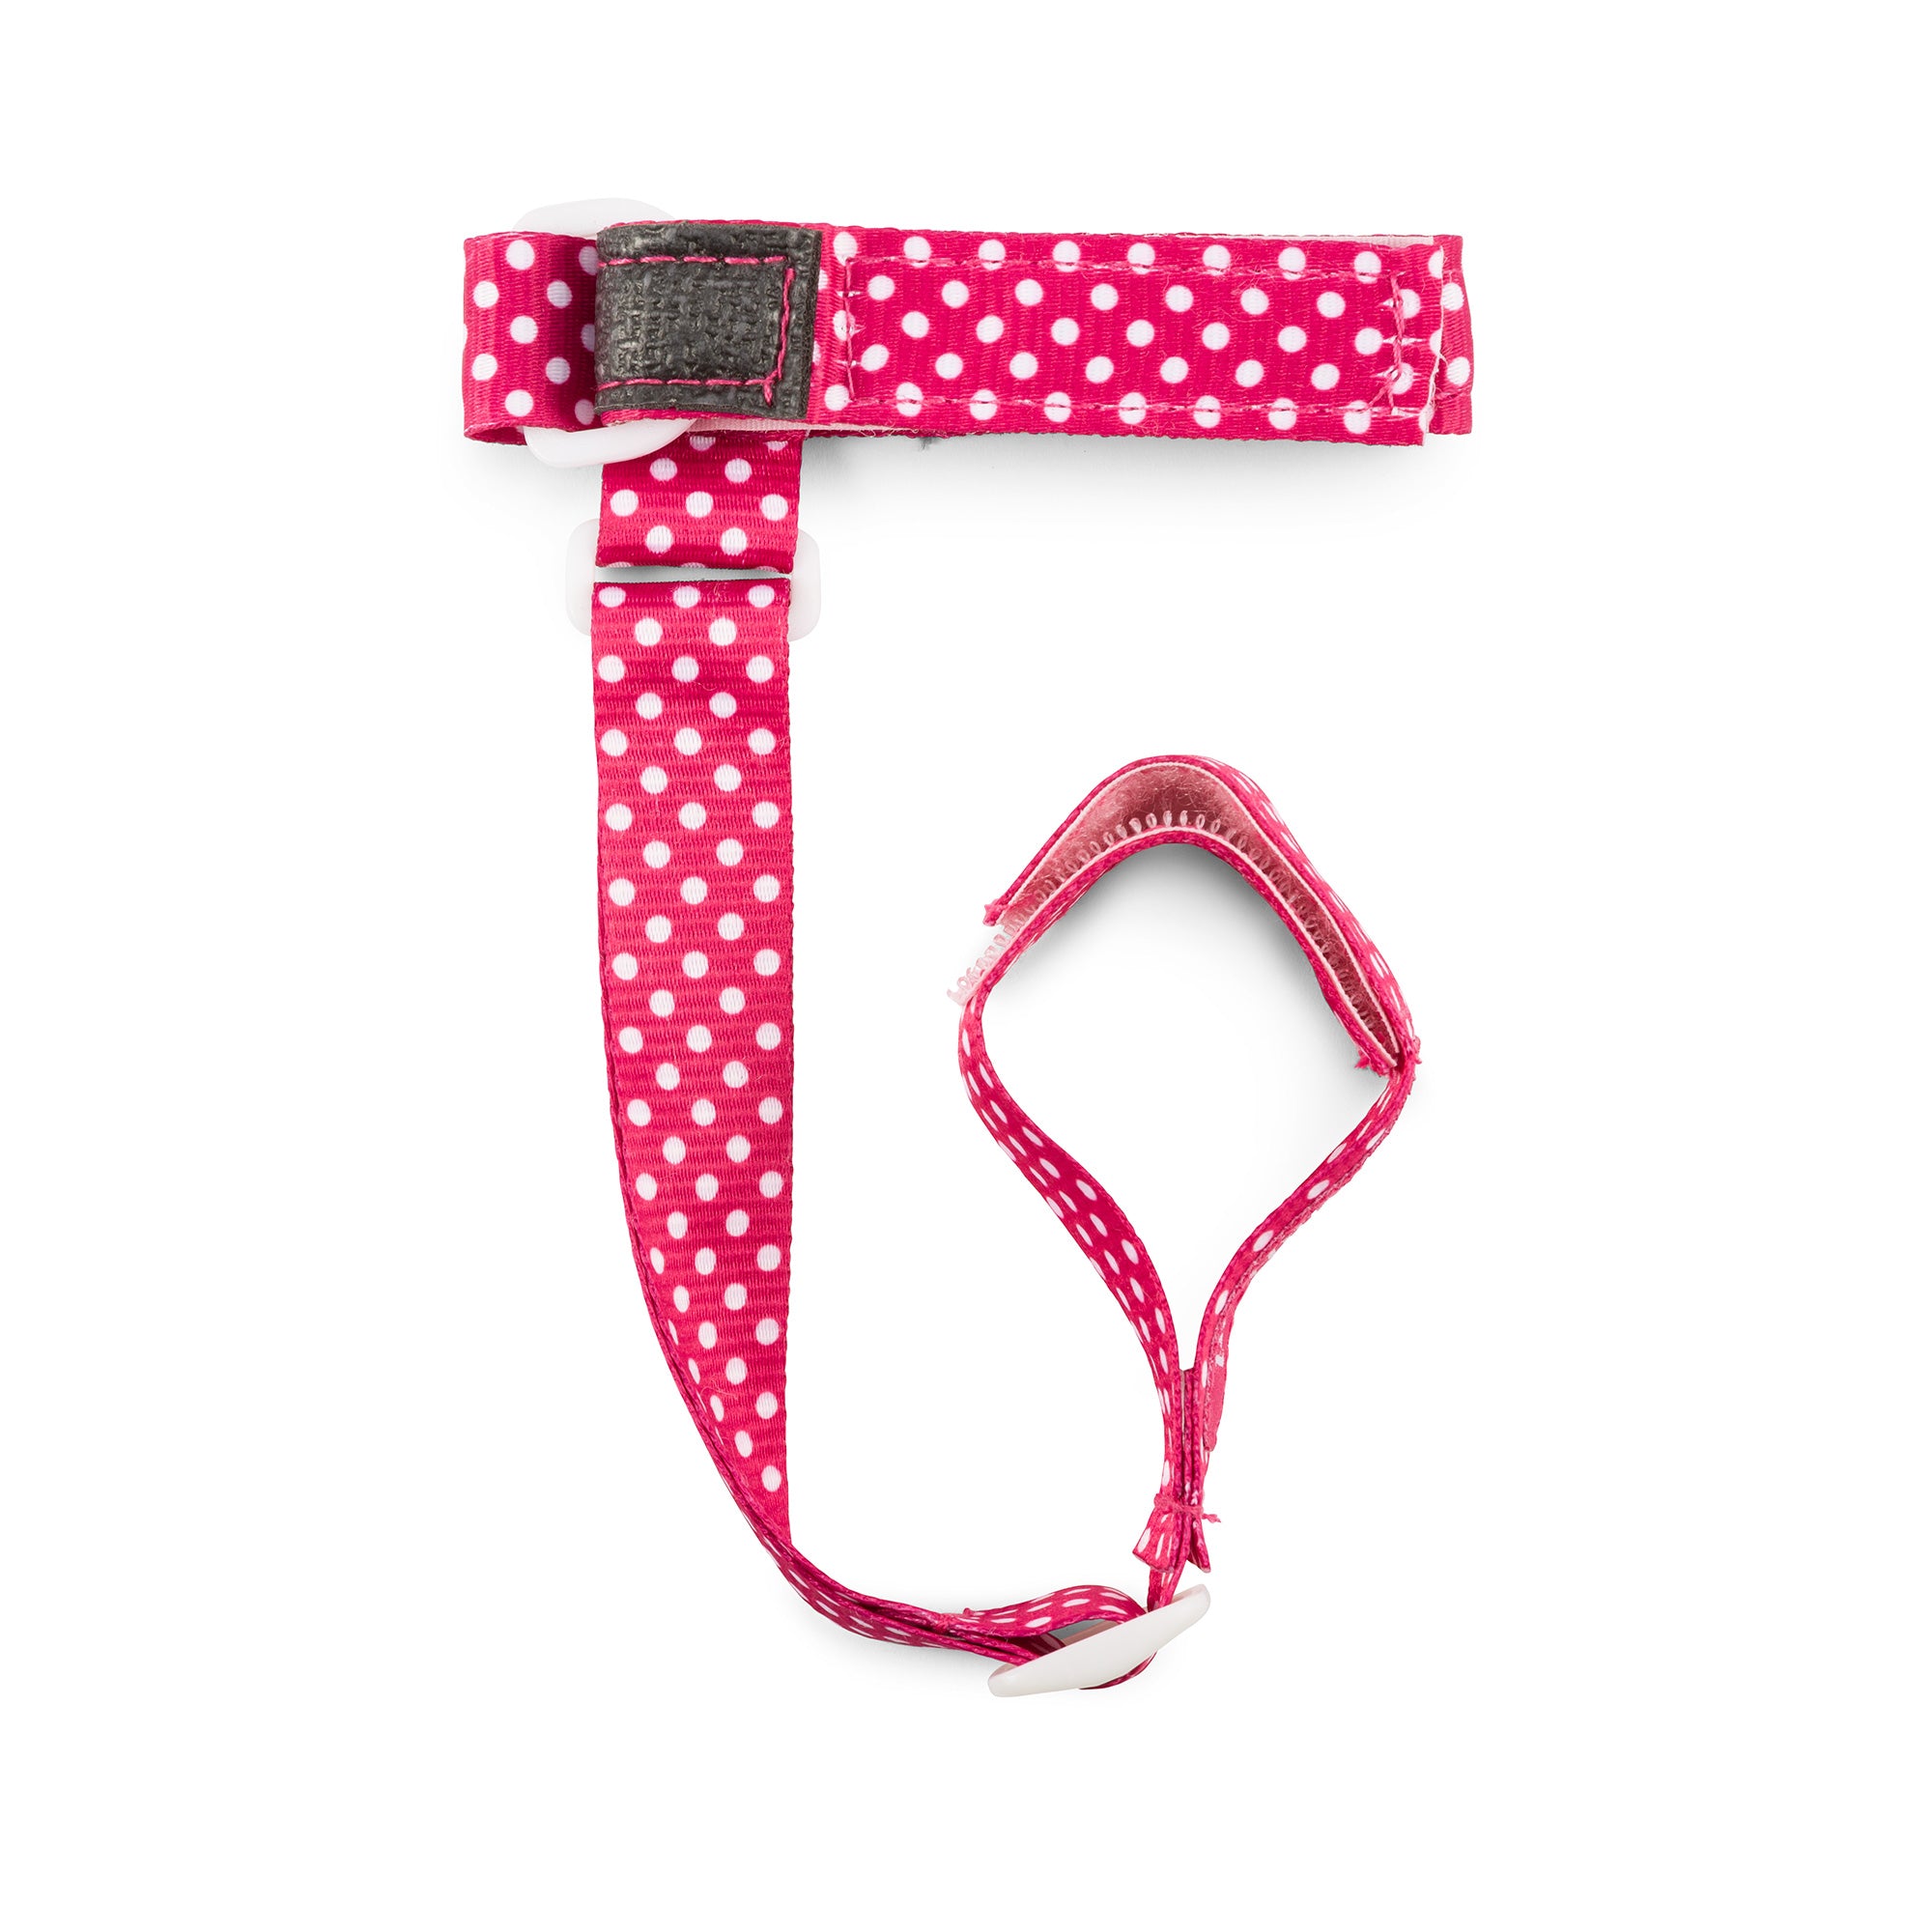 Booginhead SippiGrip for Cup, Bottle, & Toy Teether - Pink Polka Dot